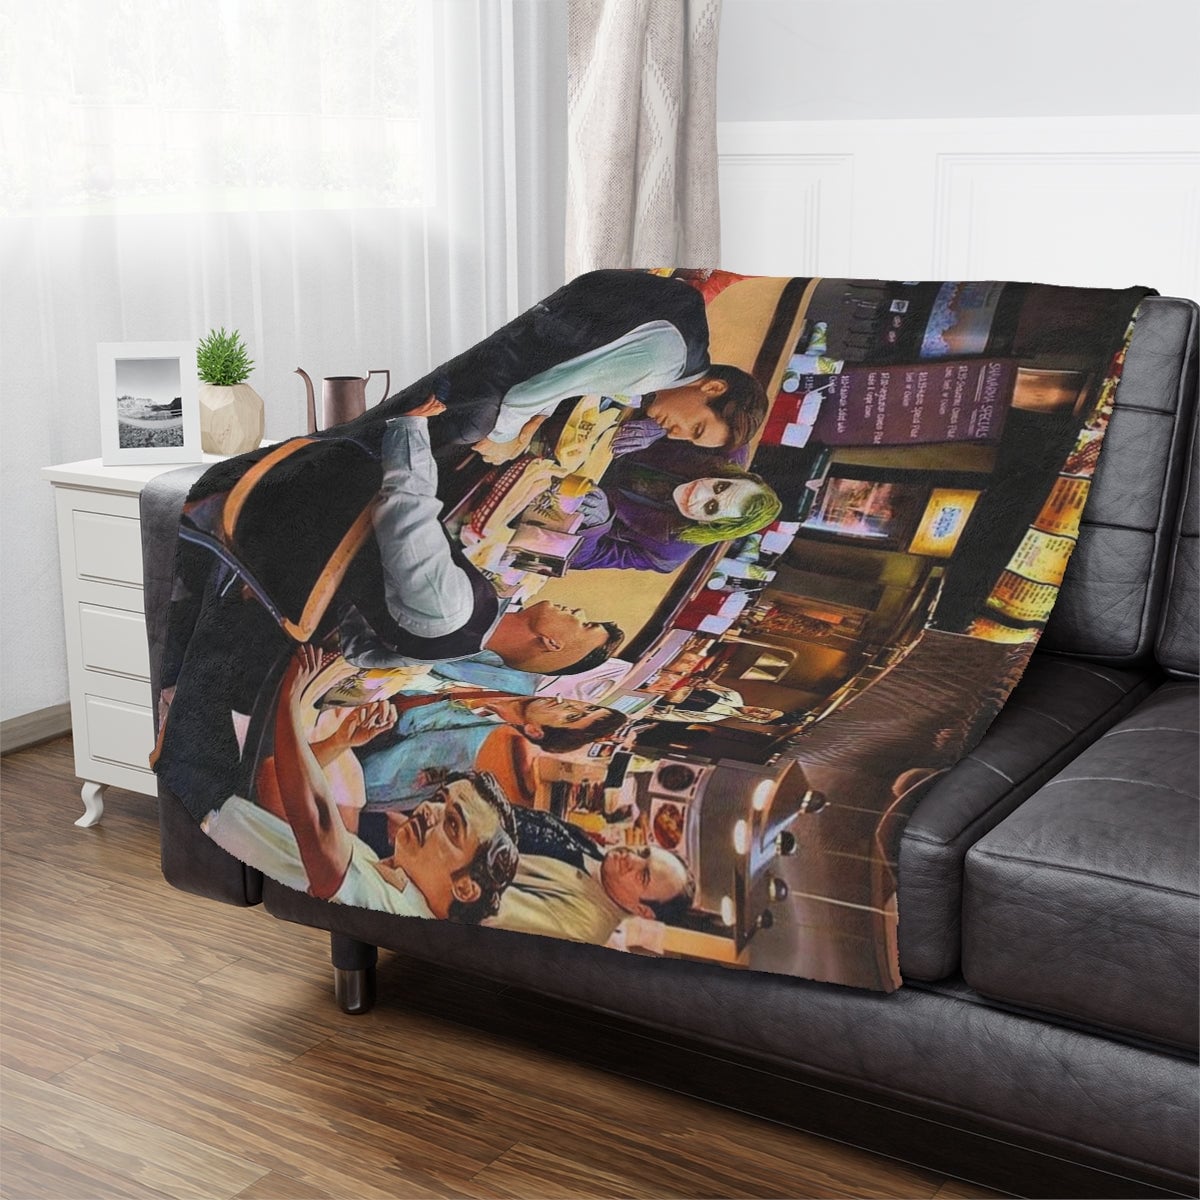 The Best Famous Mobster Movies Minky Blanket draped over a sofa, creating a nostalgic atmosphere.